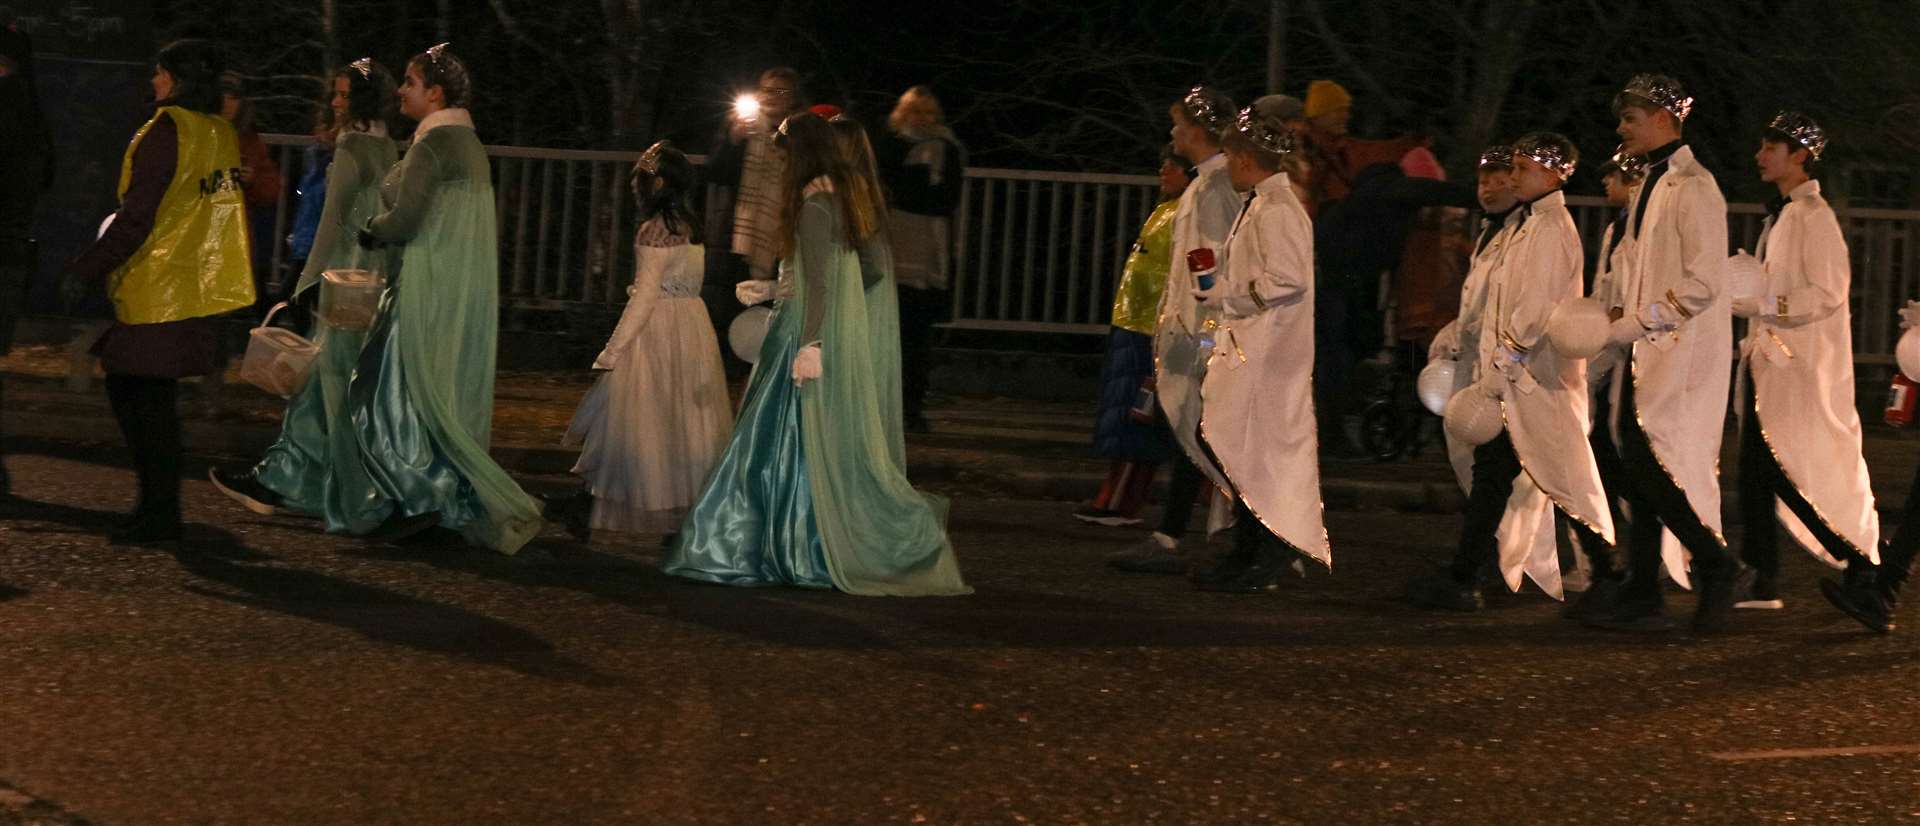 Ice kings and queens from local youth groups joined the parade.